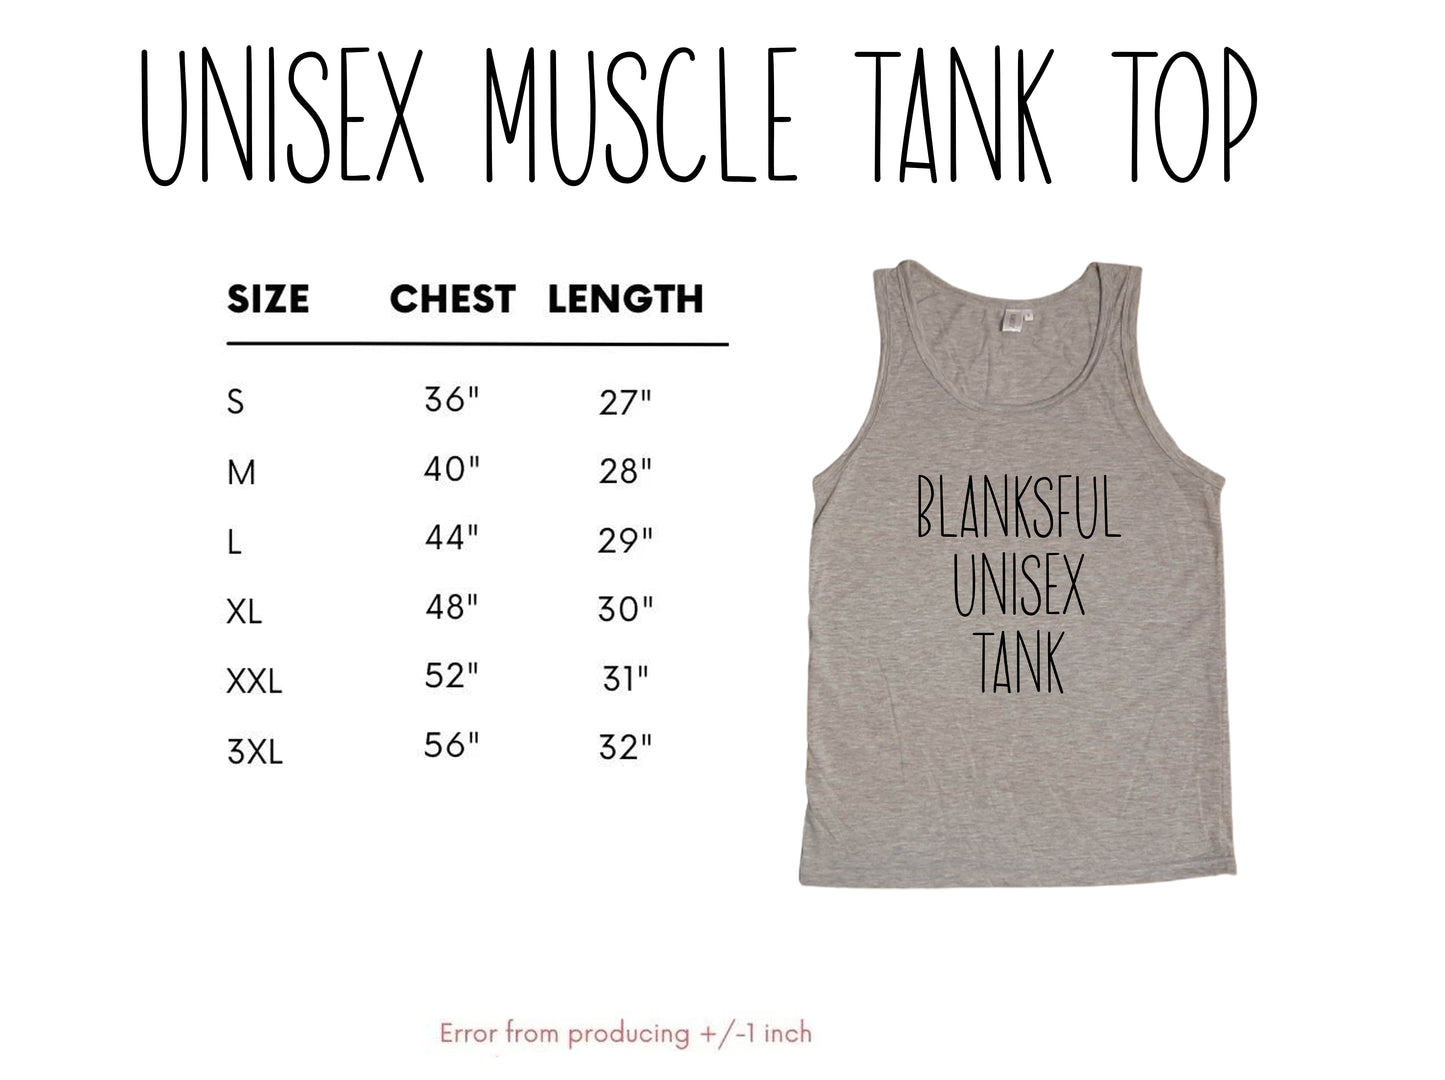 (8 COLORS) 100% Polyester Unisex Tank Top - Muscle Tank